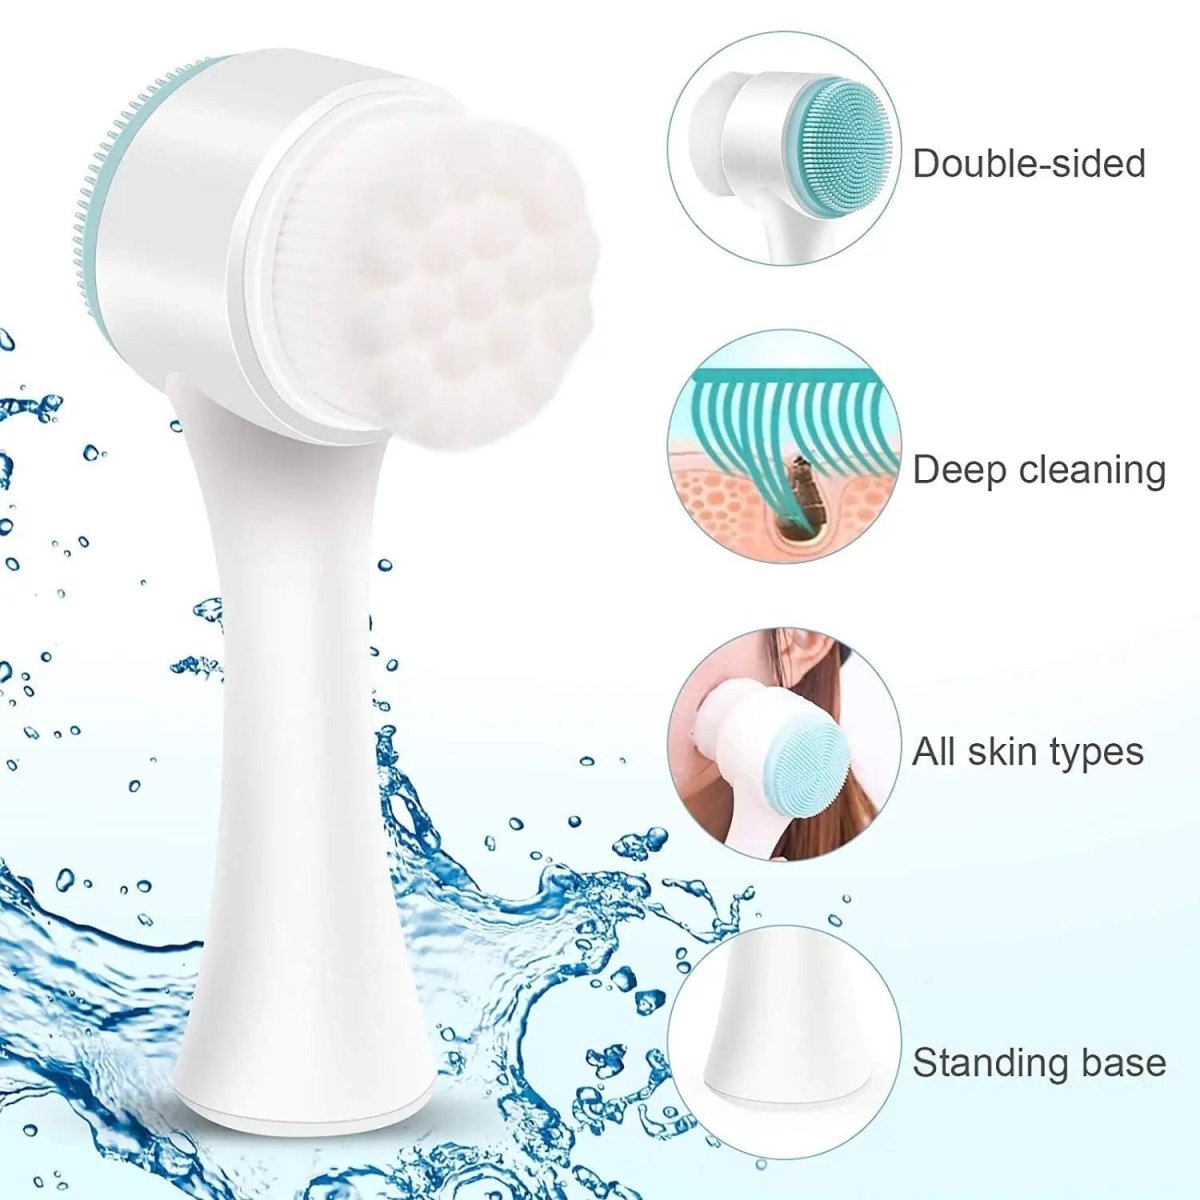 Deep Cleansing Dual Action Facial Brush - Blue - Beauty Pro Supplies Canada